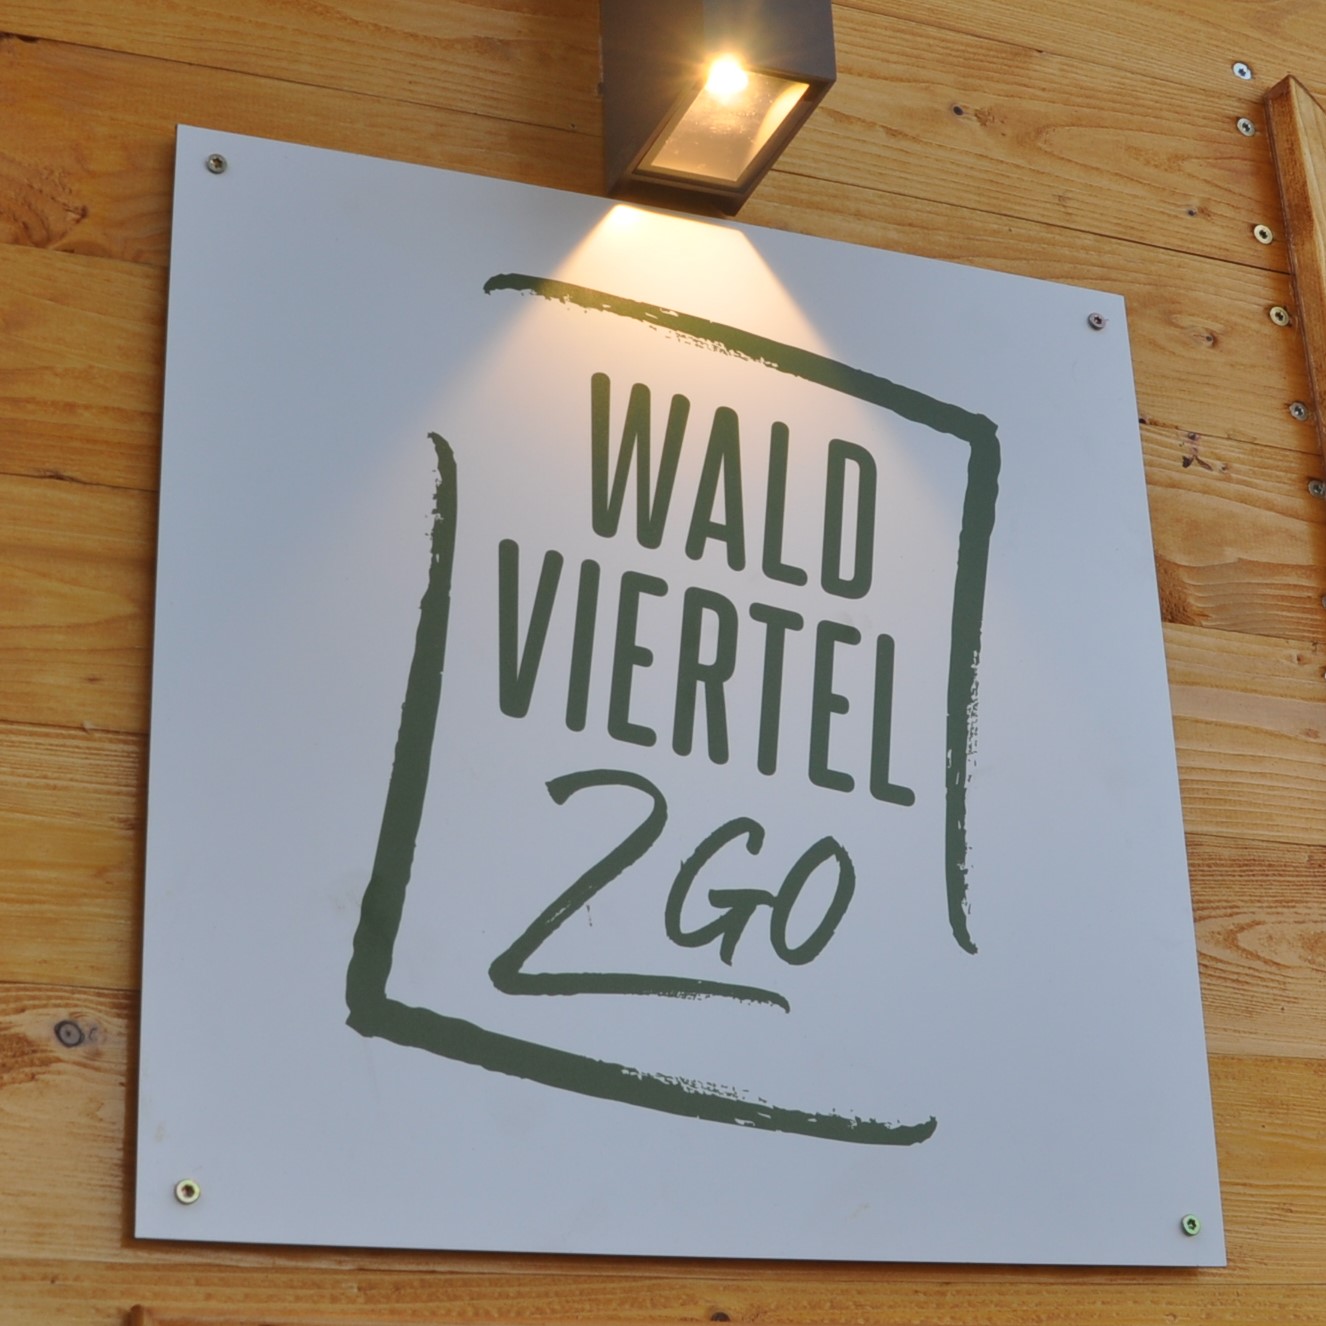 You are currently viewing Waldviertel2Go